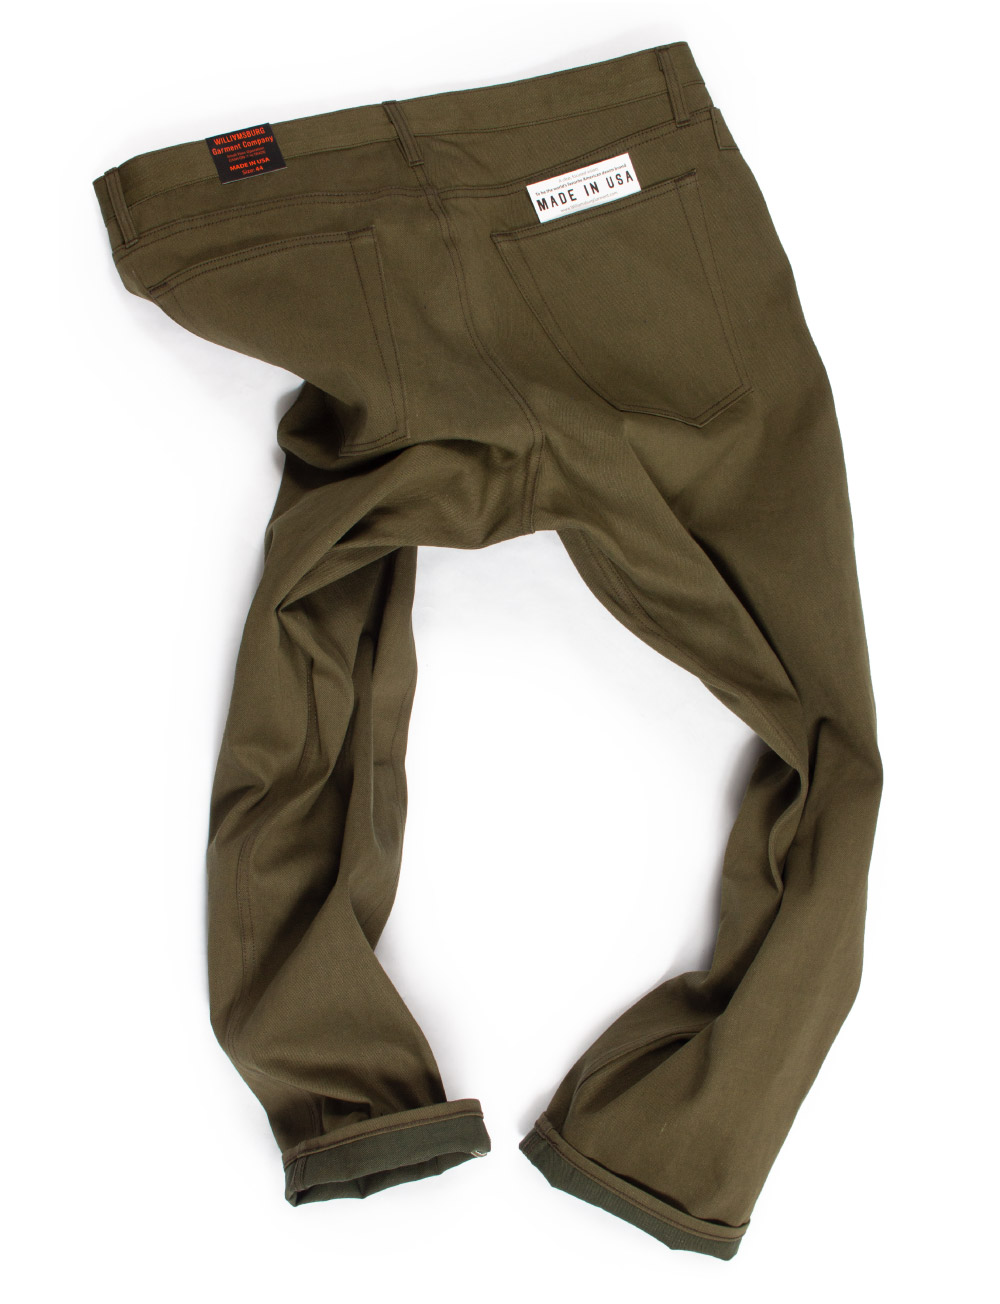 Rear of big men's size 44 Olive Green selvedge custom jeans made in Brooklyn NY by Williamsburg Garment Co.